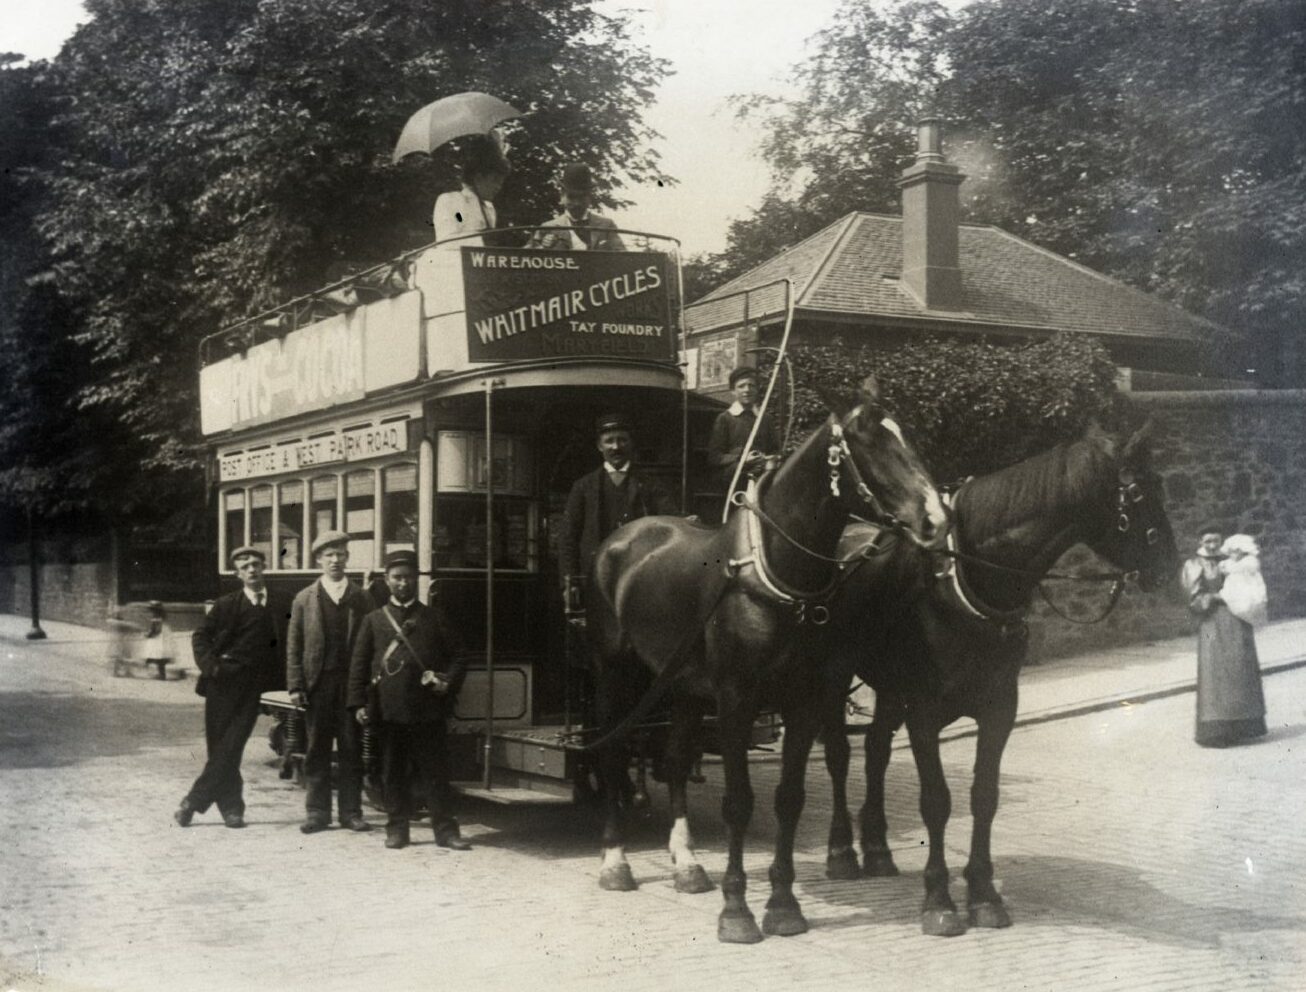 A horse-drawn tram carrying passengers in Dundee.